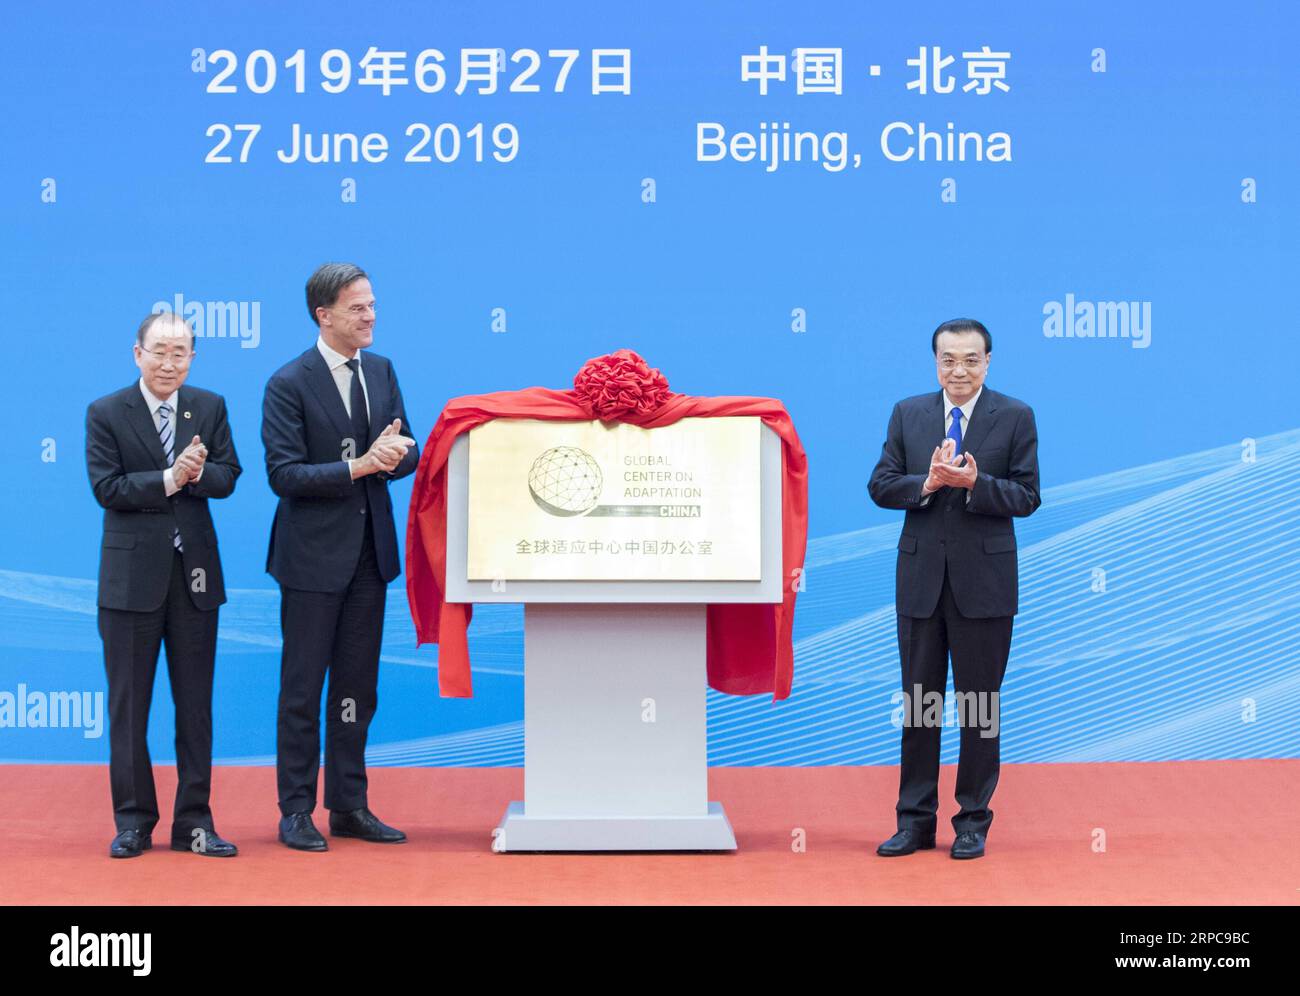 (190628) -- BEIJING, June 28, 2019 -- Chinese Premier Li Keqiang (R), Dutch Prime Minister Mark Rutte (C) and former UN Secretary-General Ban Ki-moon attend the inaugural ceremony of the Global Center on Adaptation China Office at the Great Hall of the People in Beijing, capital of China, June 27, 2019. ) CHINA-BEIJING-LI KEQIANG-CLIMATE CHANGE-GLOBAL CENTER ON ADAPTATION (CN) WangxYe PUBLICATIONxNOTxINxCHN Stock Photo